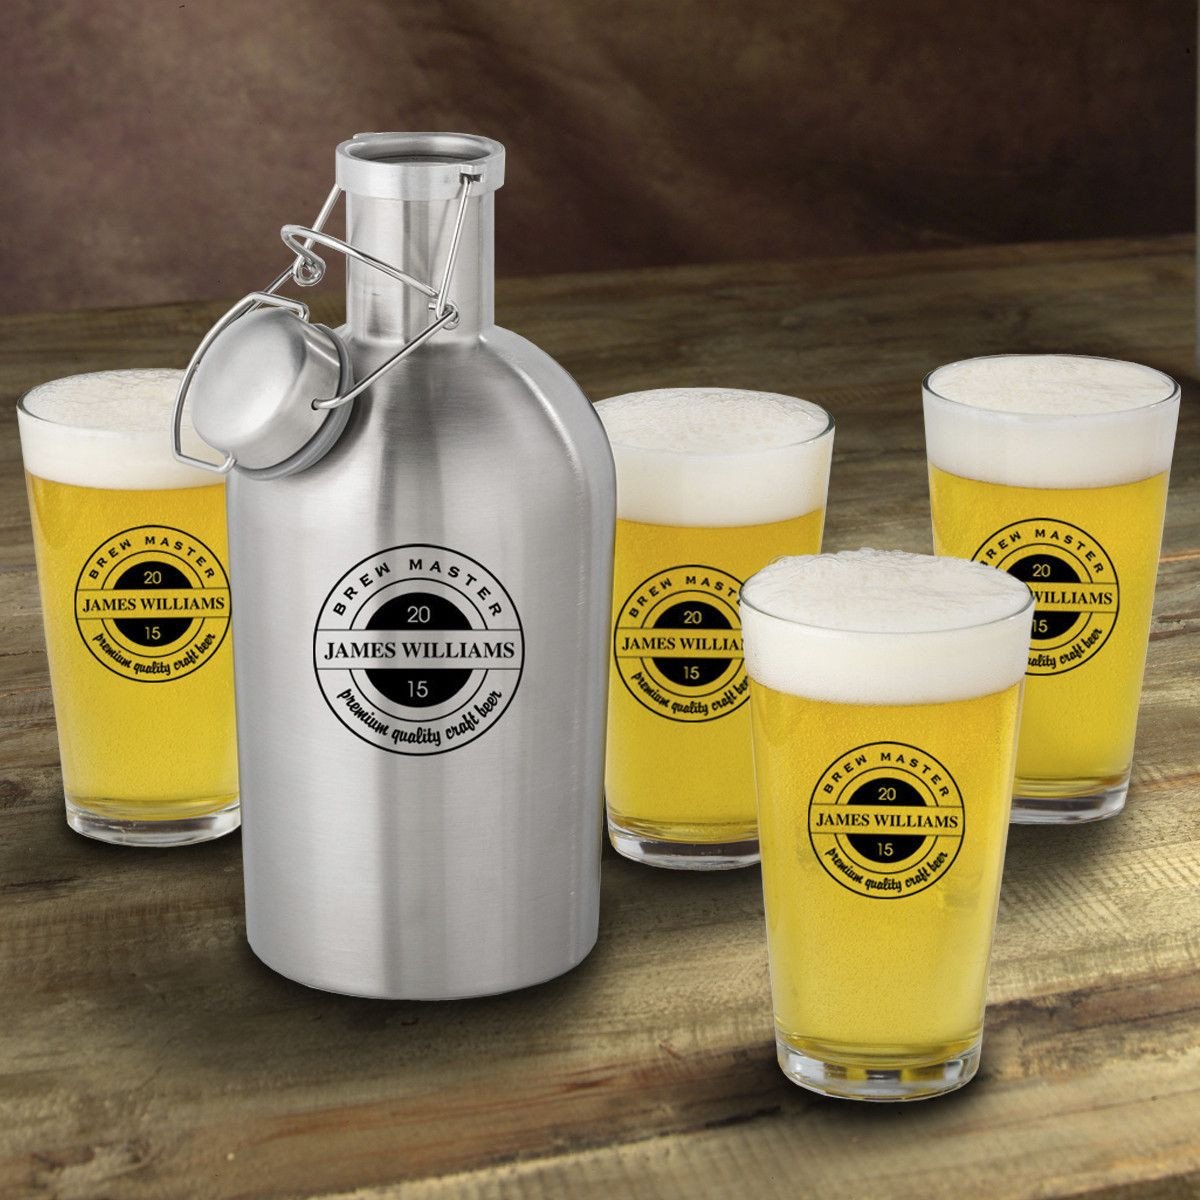 Stainless Steel Beer Growler with Pint Glass Set